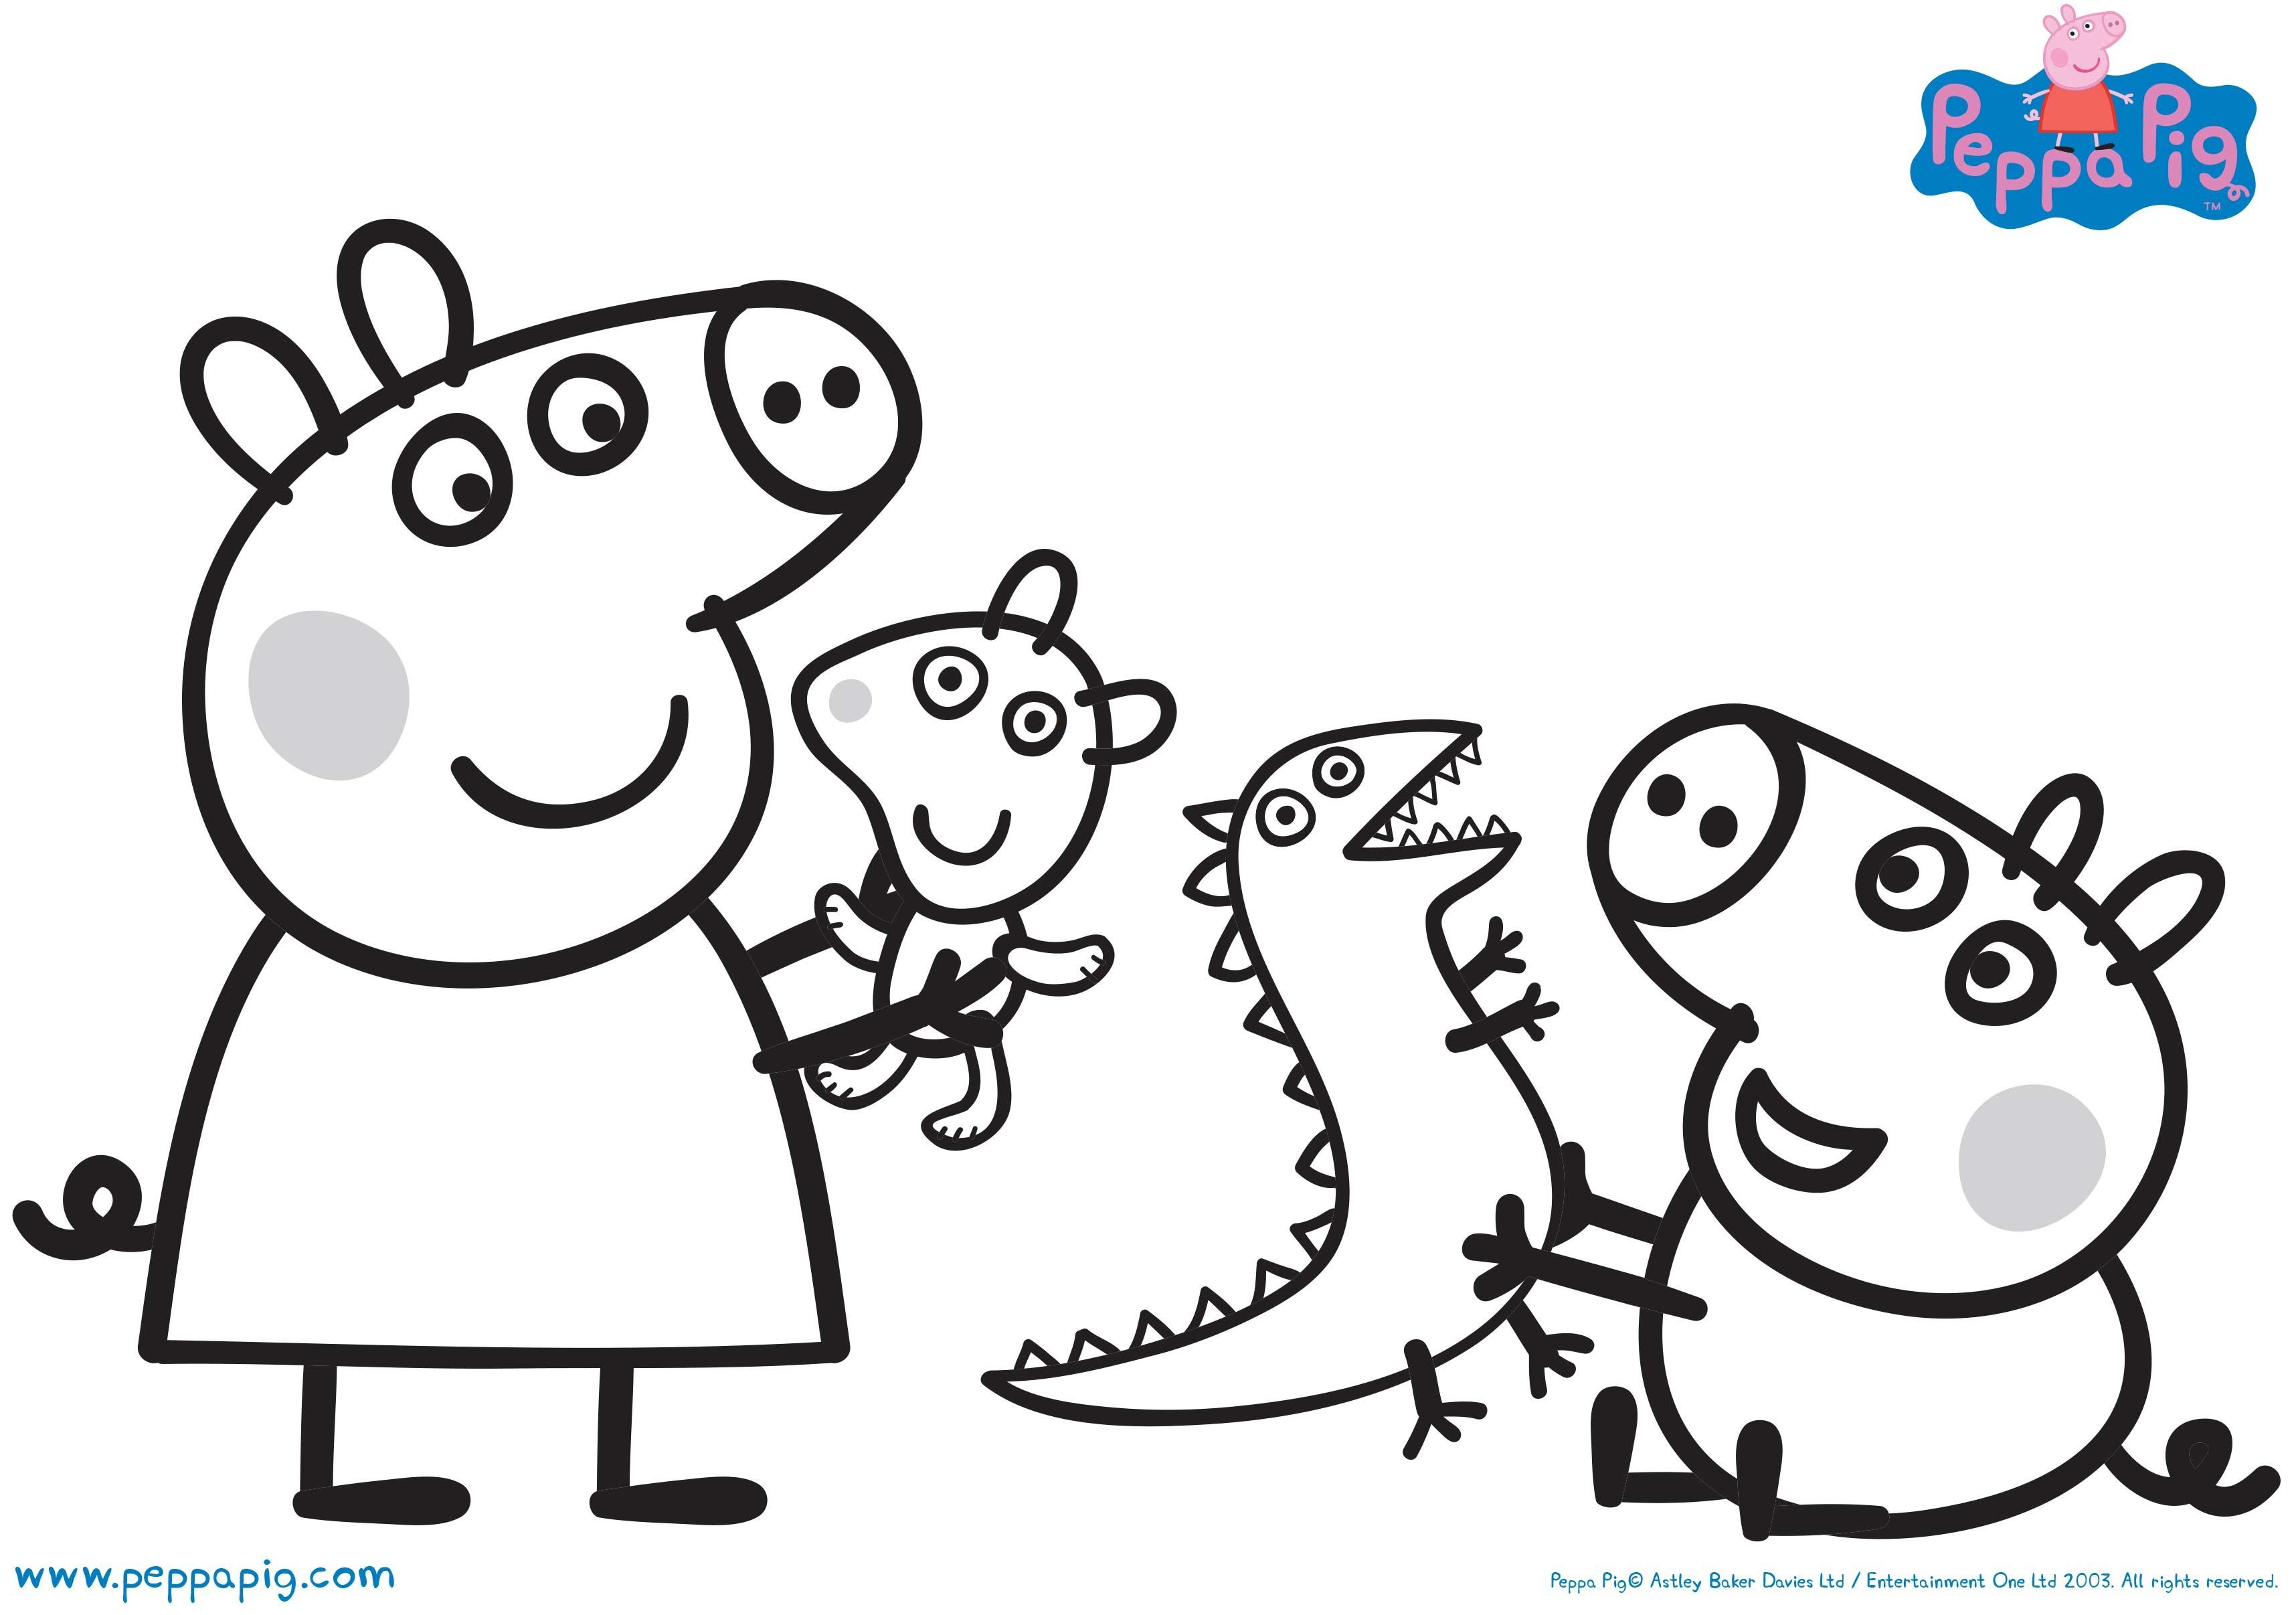 Peppa Pig Coloring Pages Best Coloring Pages Line Peppa Pig Best Peppa Pig Coloring Pages for